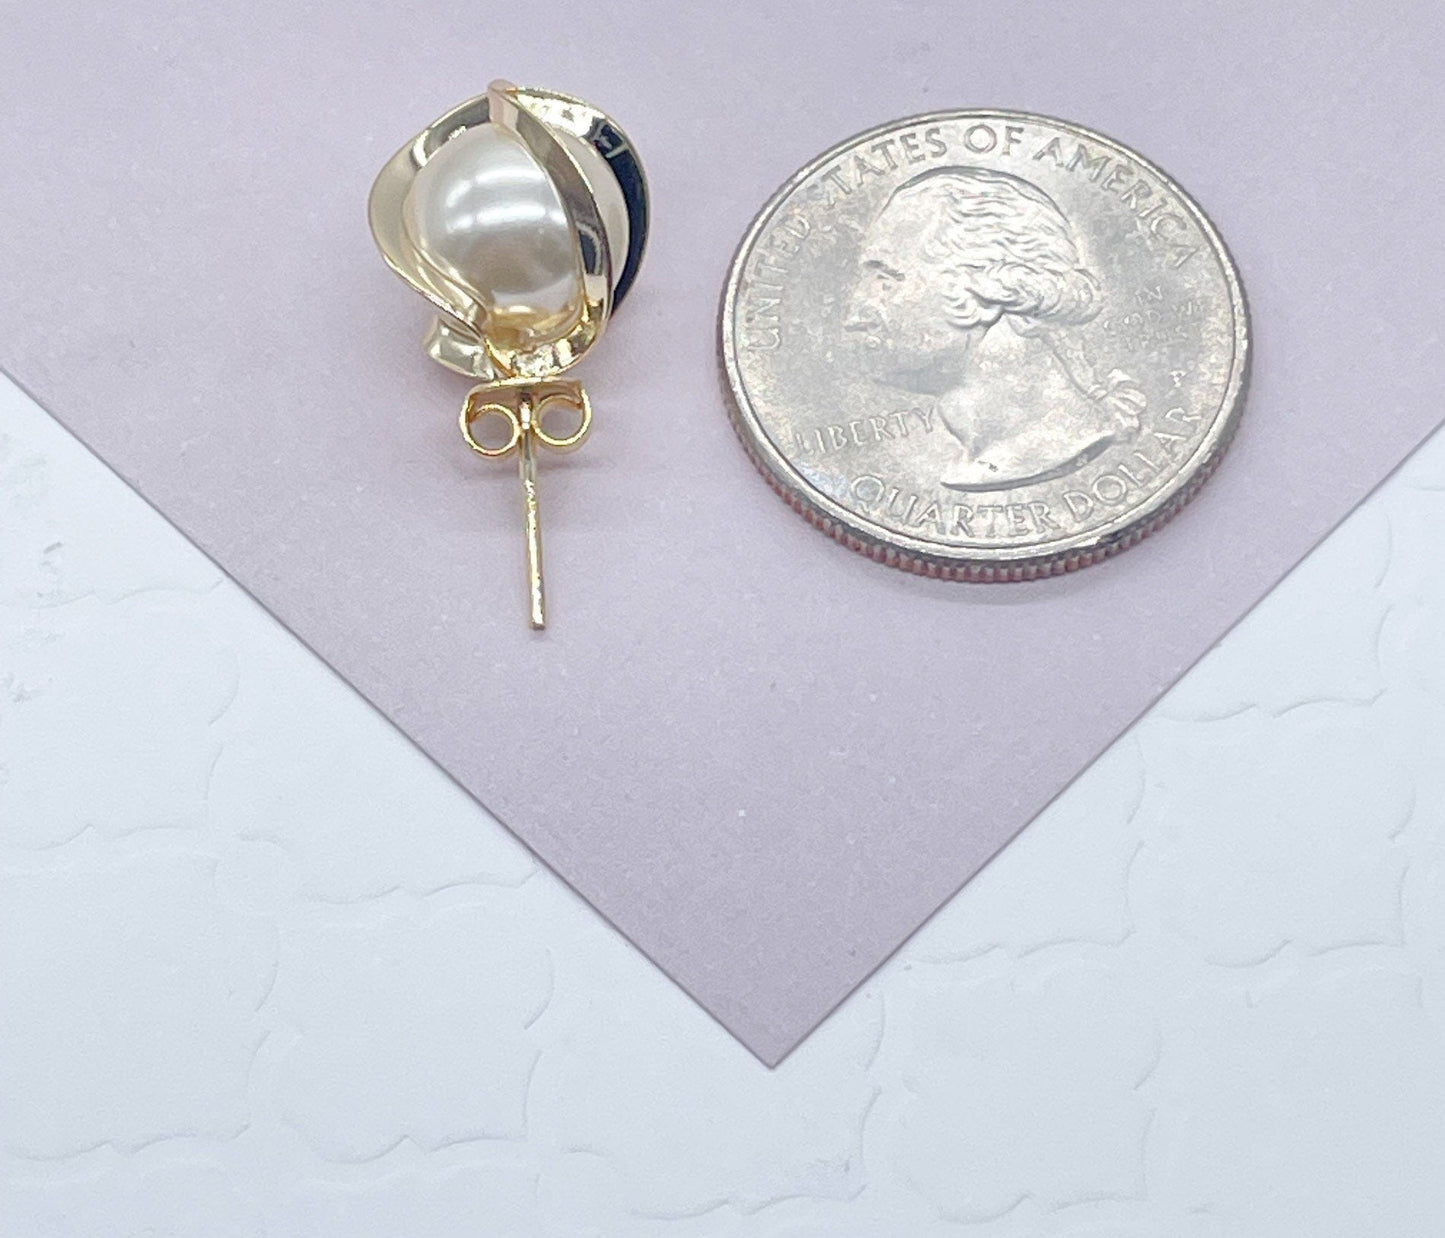 18k Gold Layered Pearl Stud Wrapped In Gold Thread 12 mm Size, Simulated Pearl,